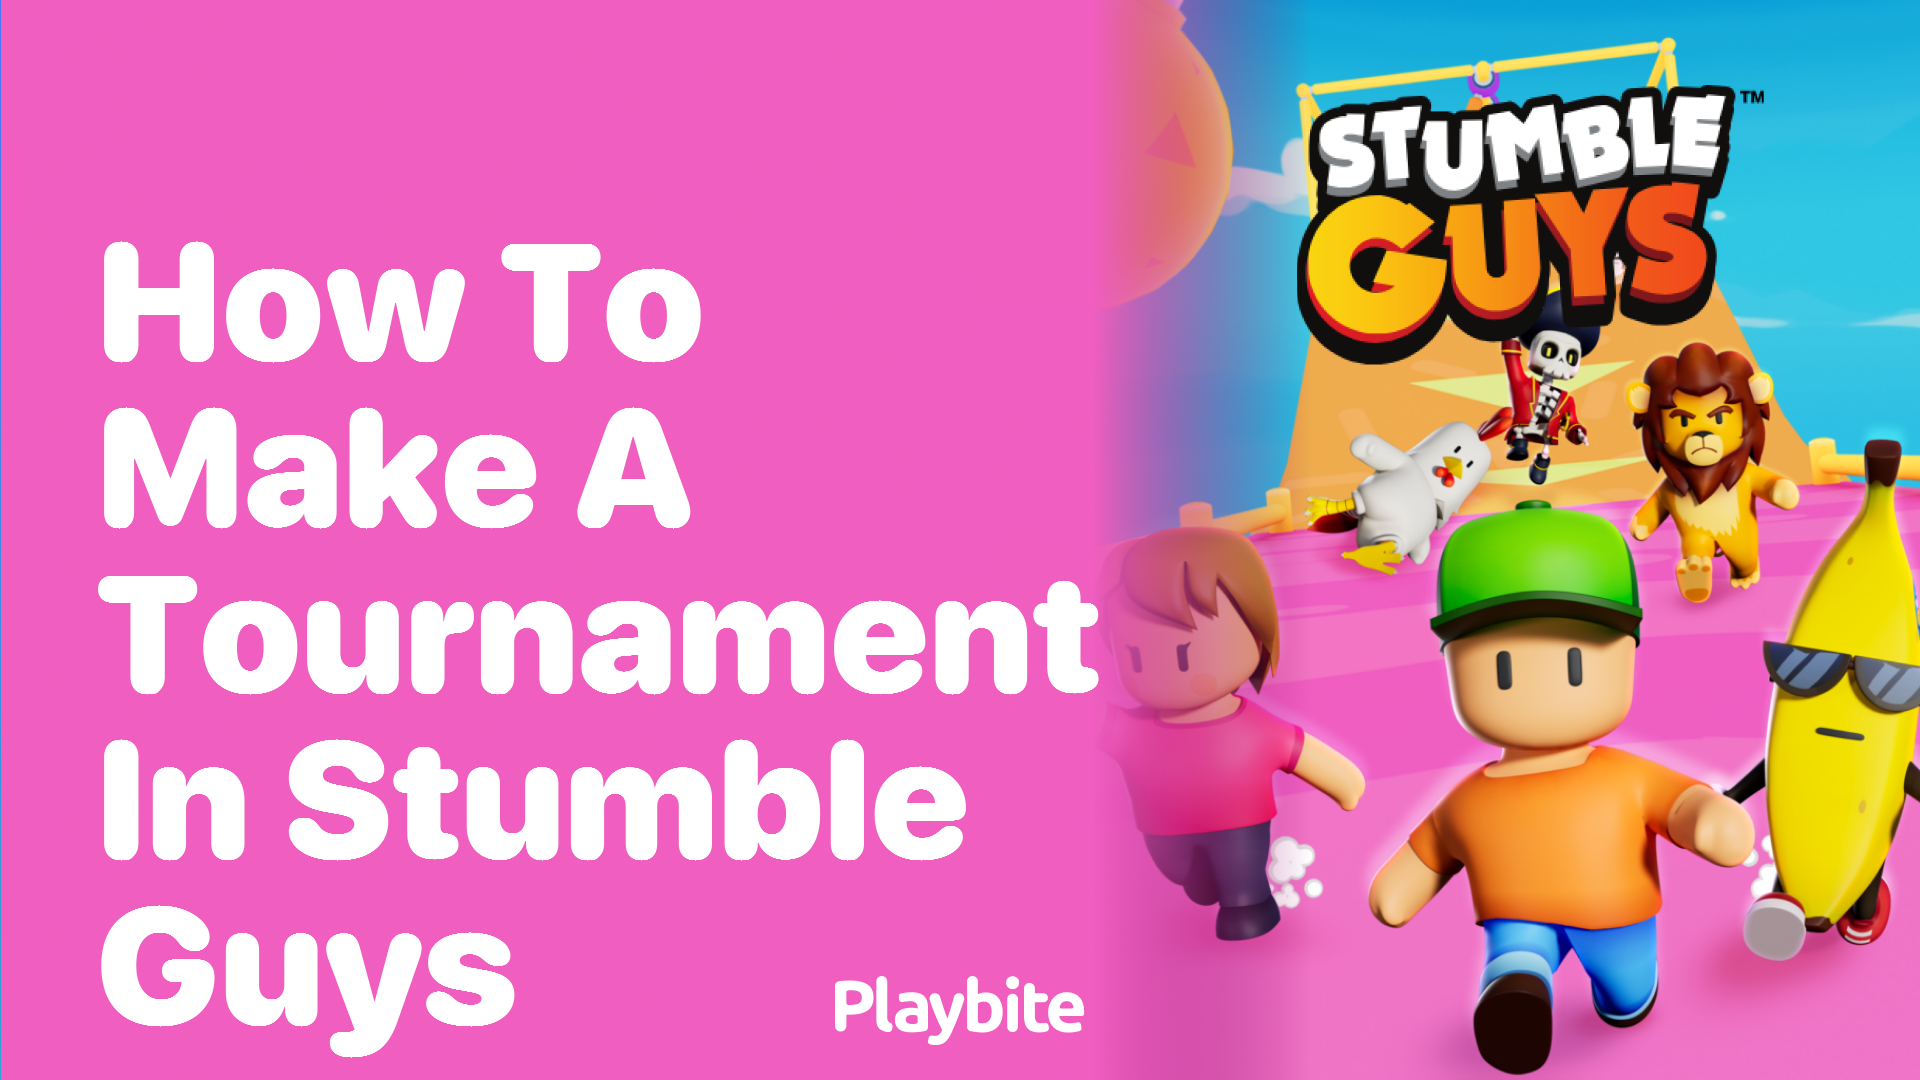 How to Make a Tournament in Stumble Guys